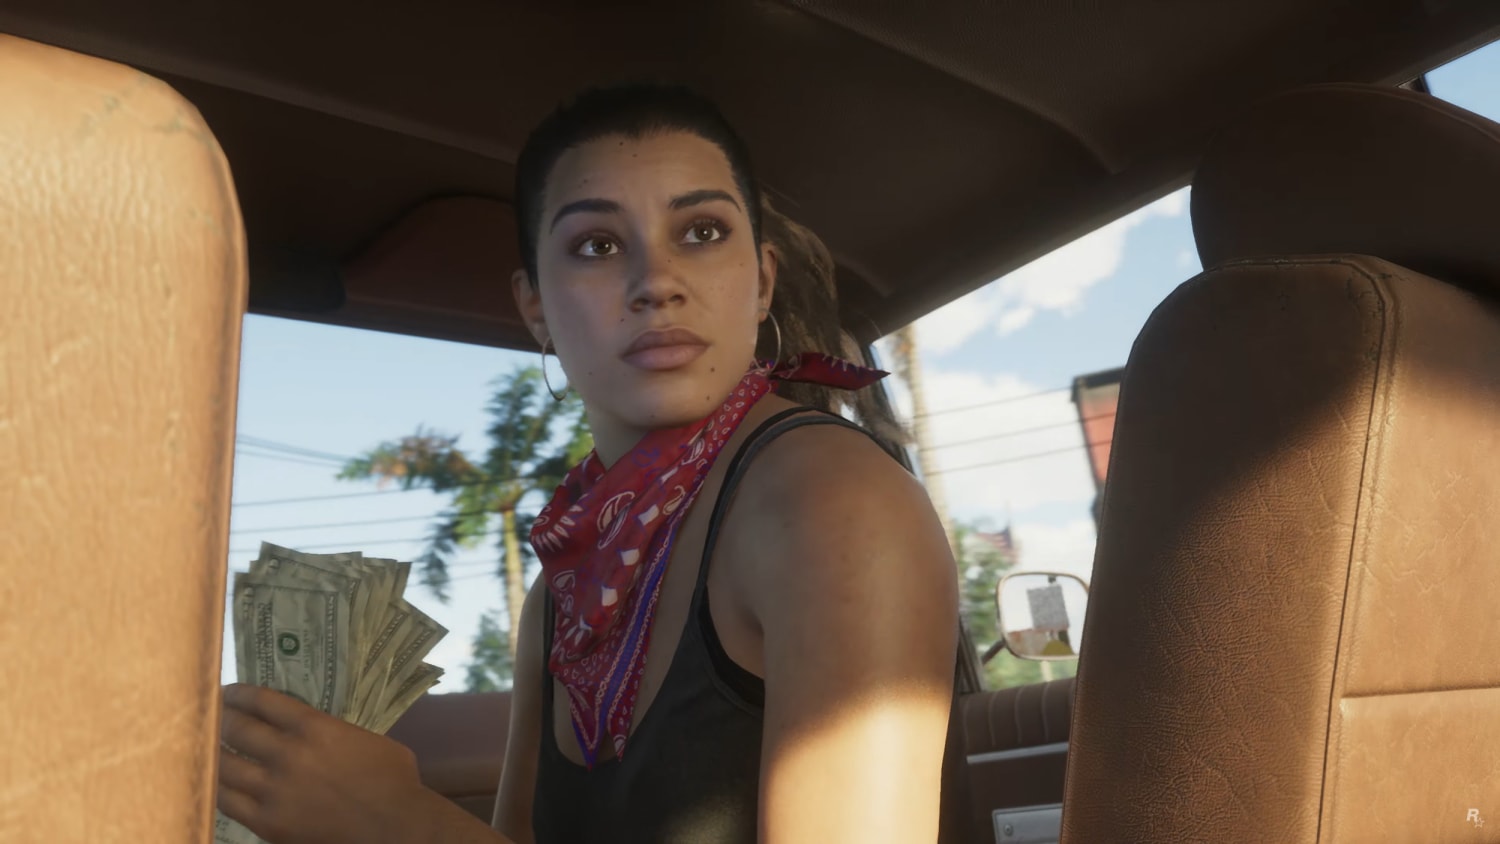 Grand Theft Auto VI Release Date, Gameplay, Story, Trailers